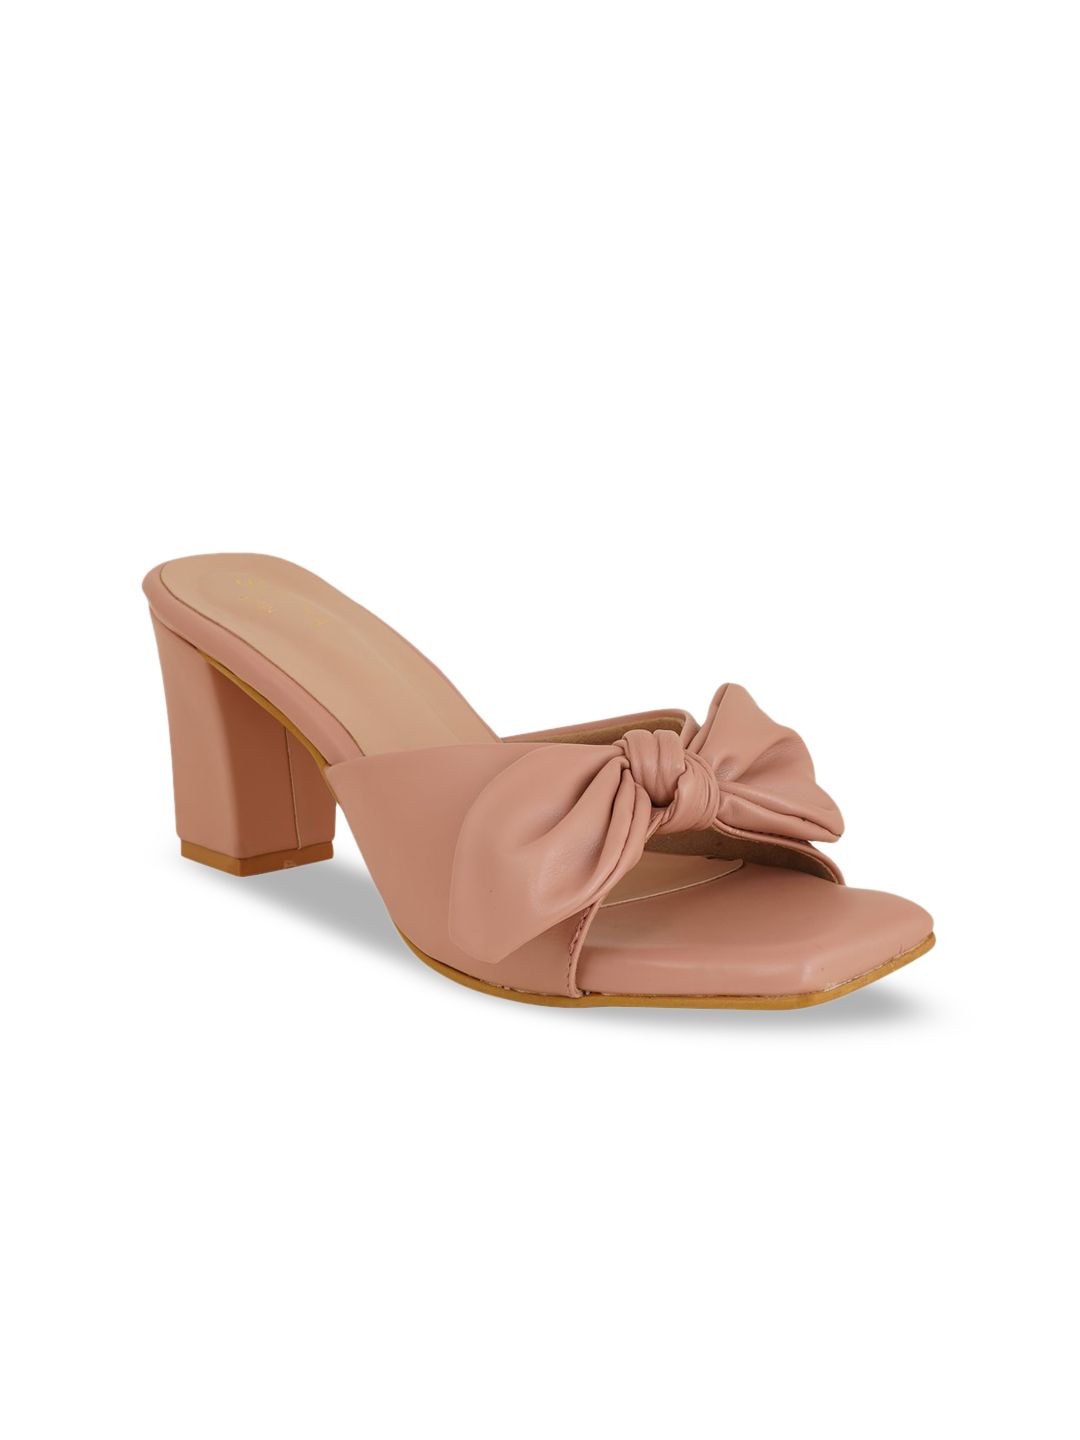 SCENTRA Peach-Coloured Block Mules with Bows Price in India